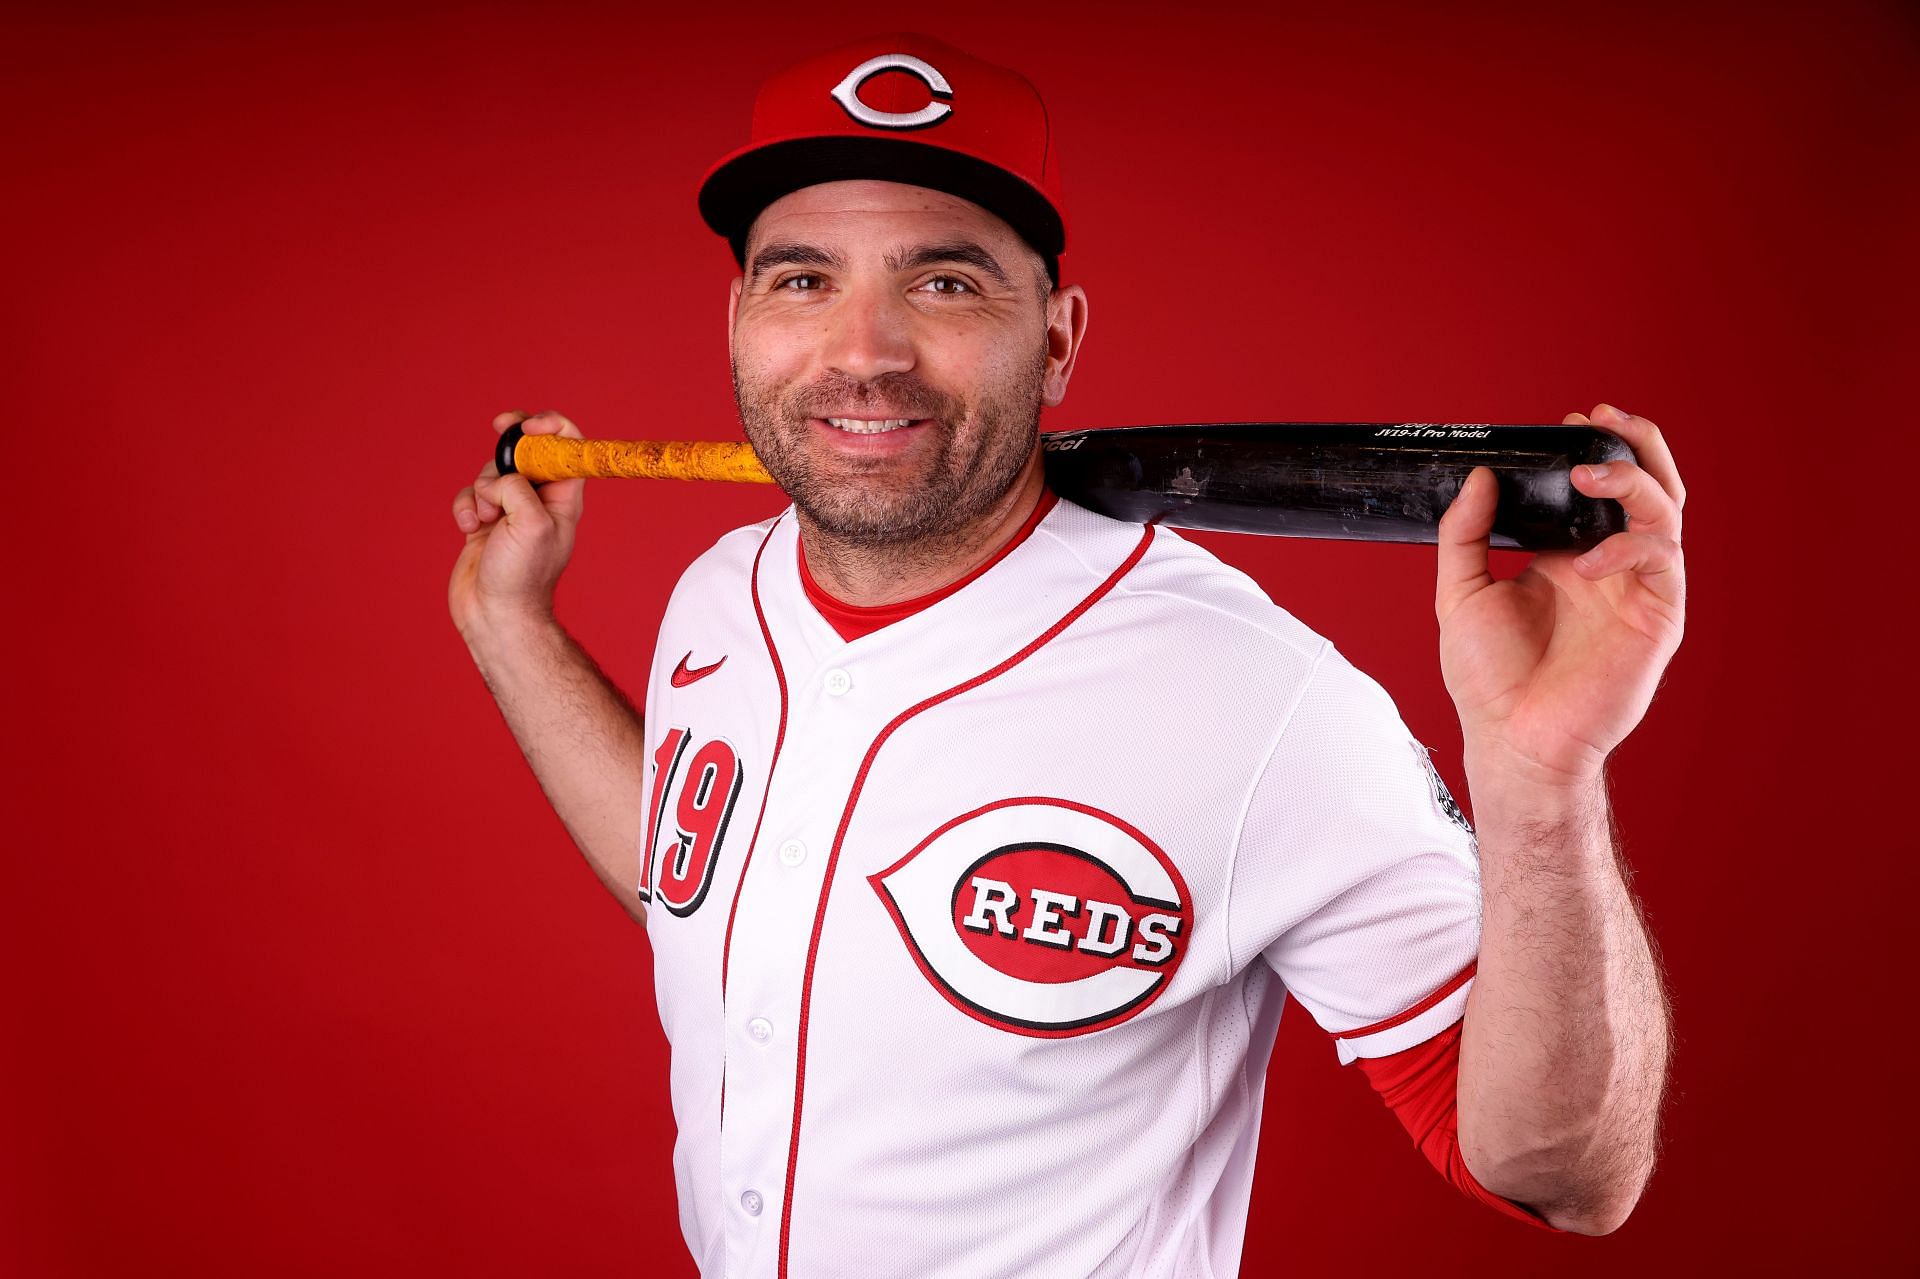 Joey Votto #19 of the Cincinnati Reds poses for a portrait during photo day